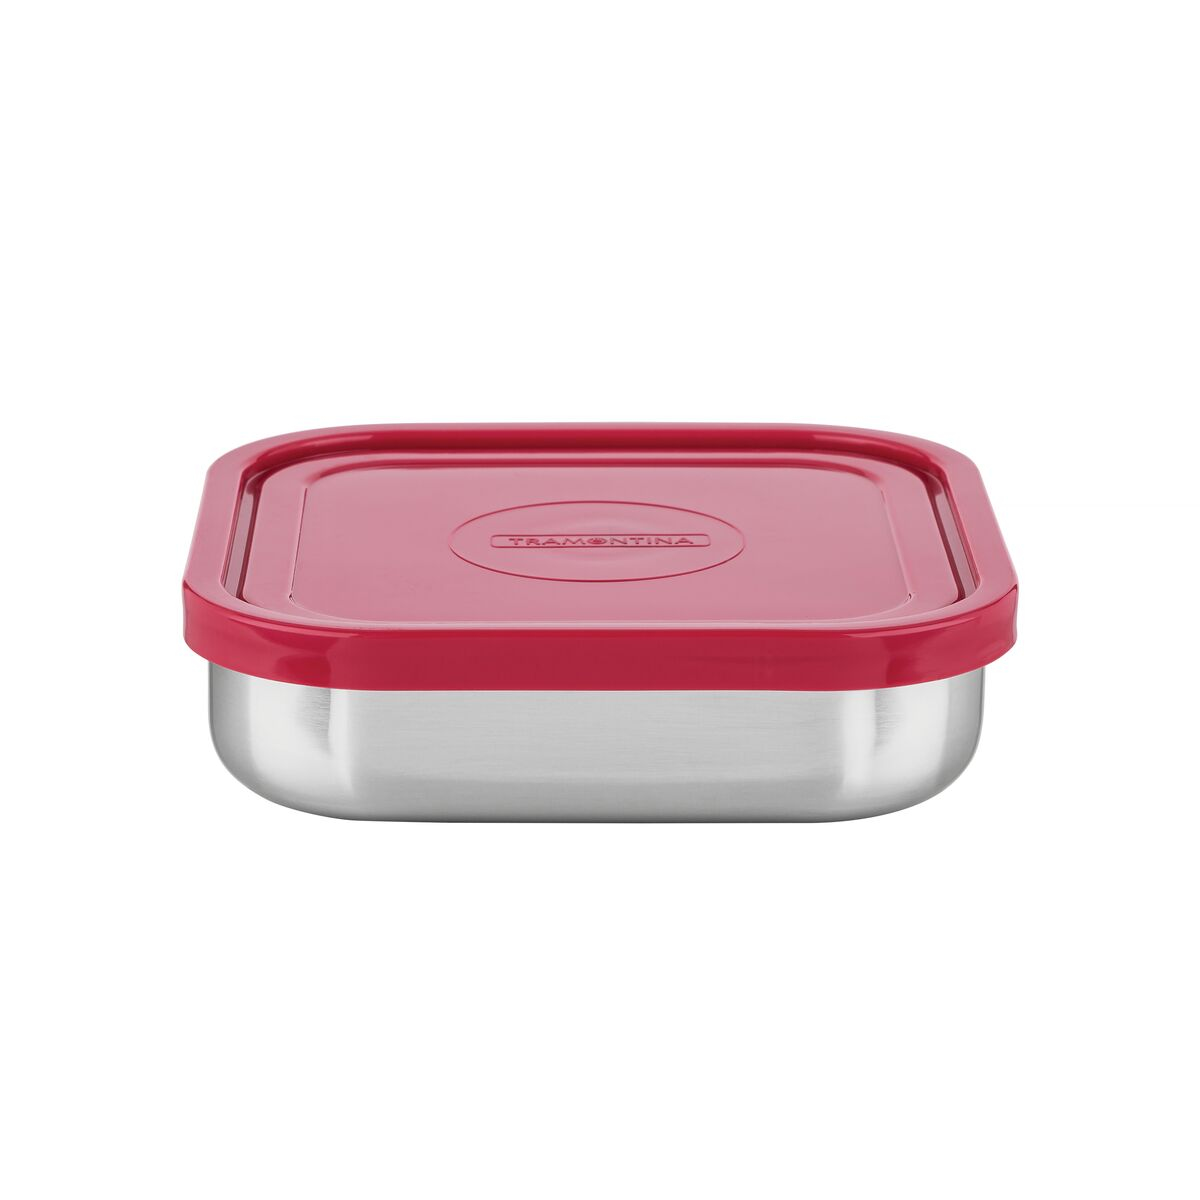 Tramontina Freezinox square stainless steel container with pink plastic lid, 0,8 L